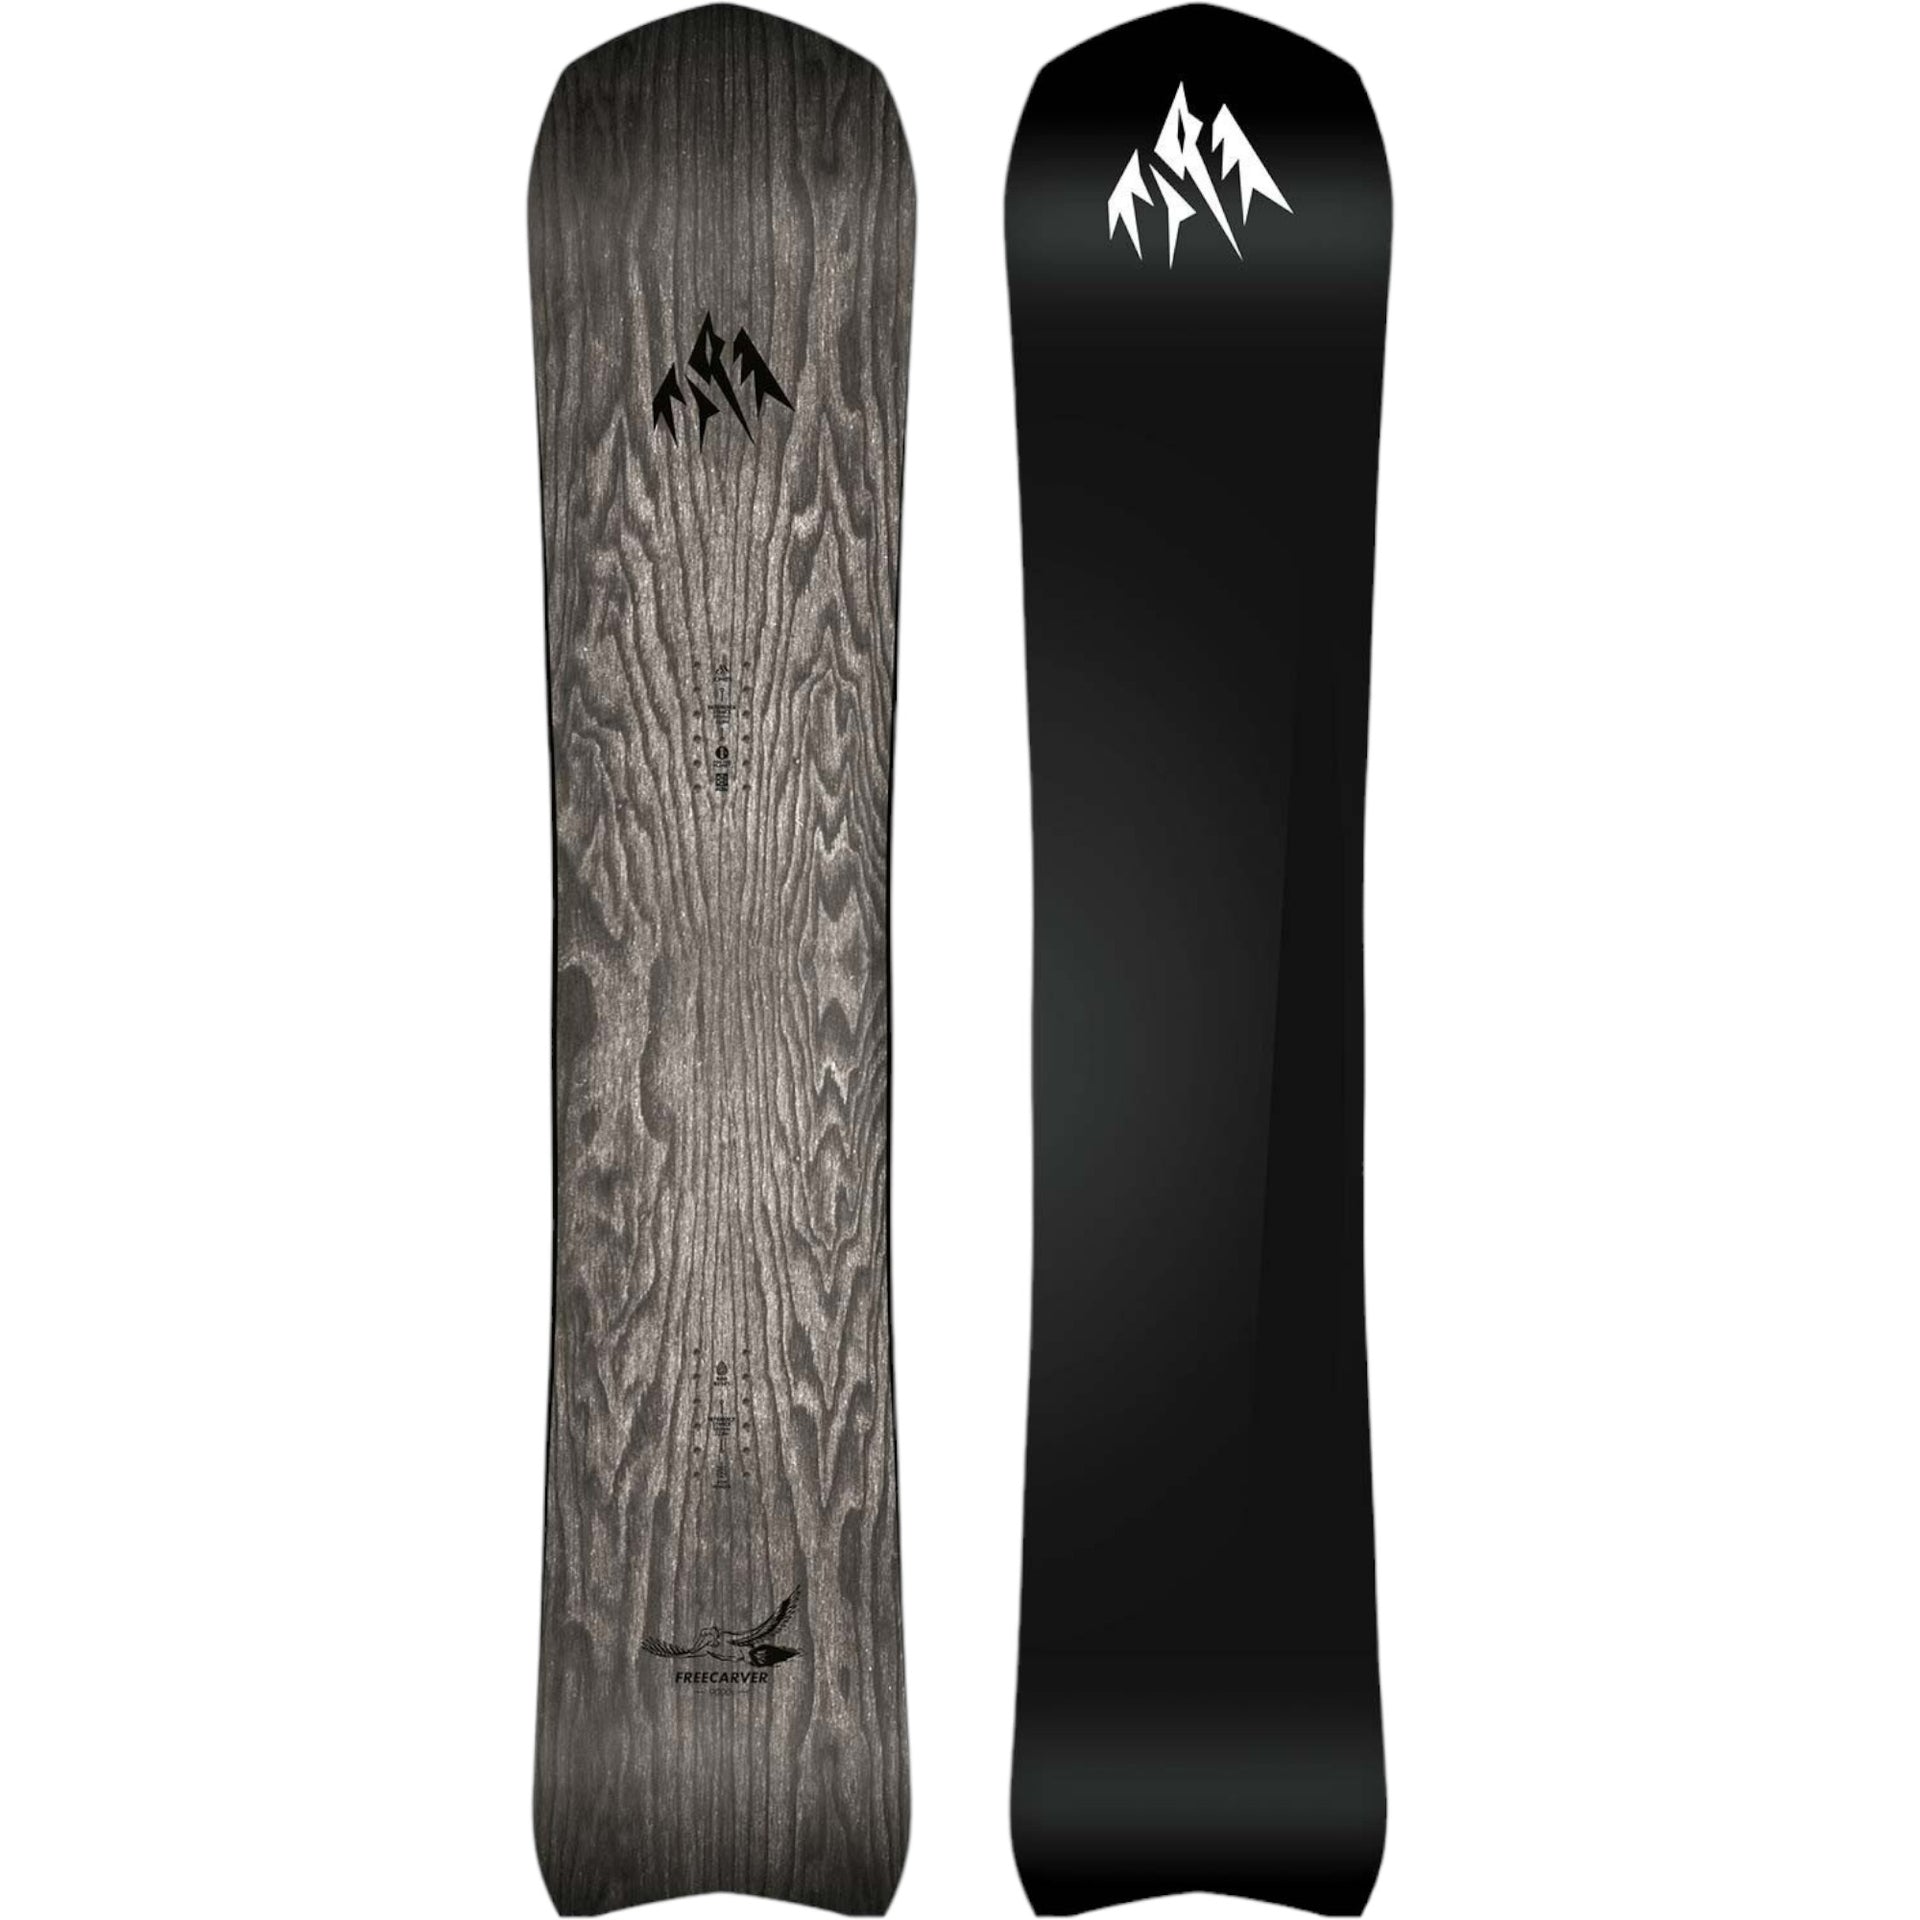 Jones Snowboards Flagship - Planches Snowboard Homme